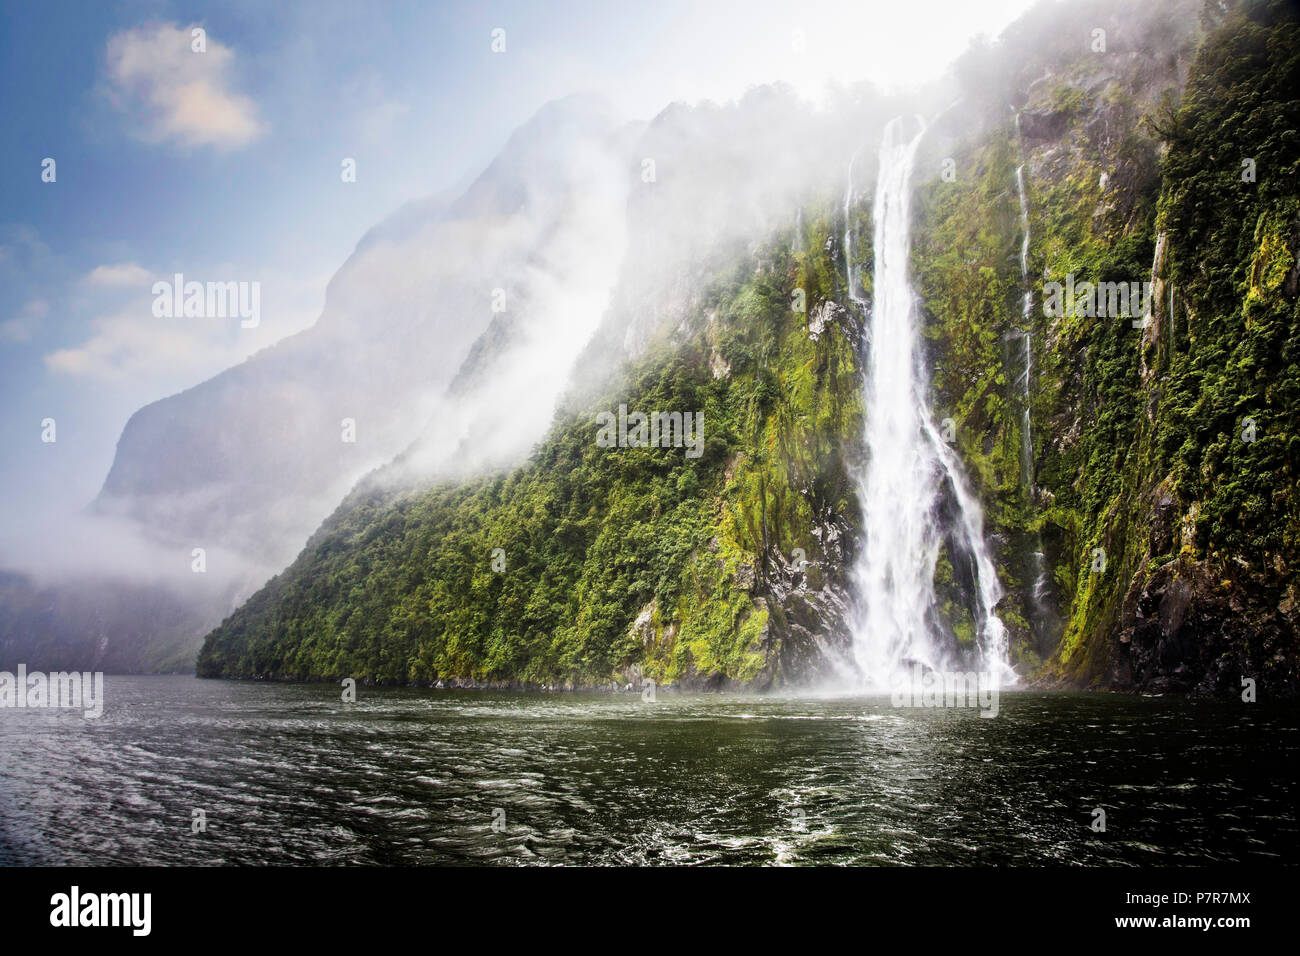 Water from rainfall cascades down mountainsides. Milford Sound in Fiordland, South Island, New Zealand. Stock Photo